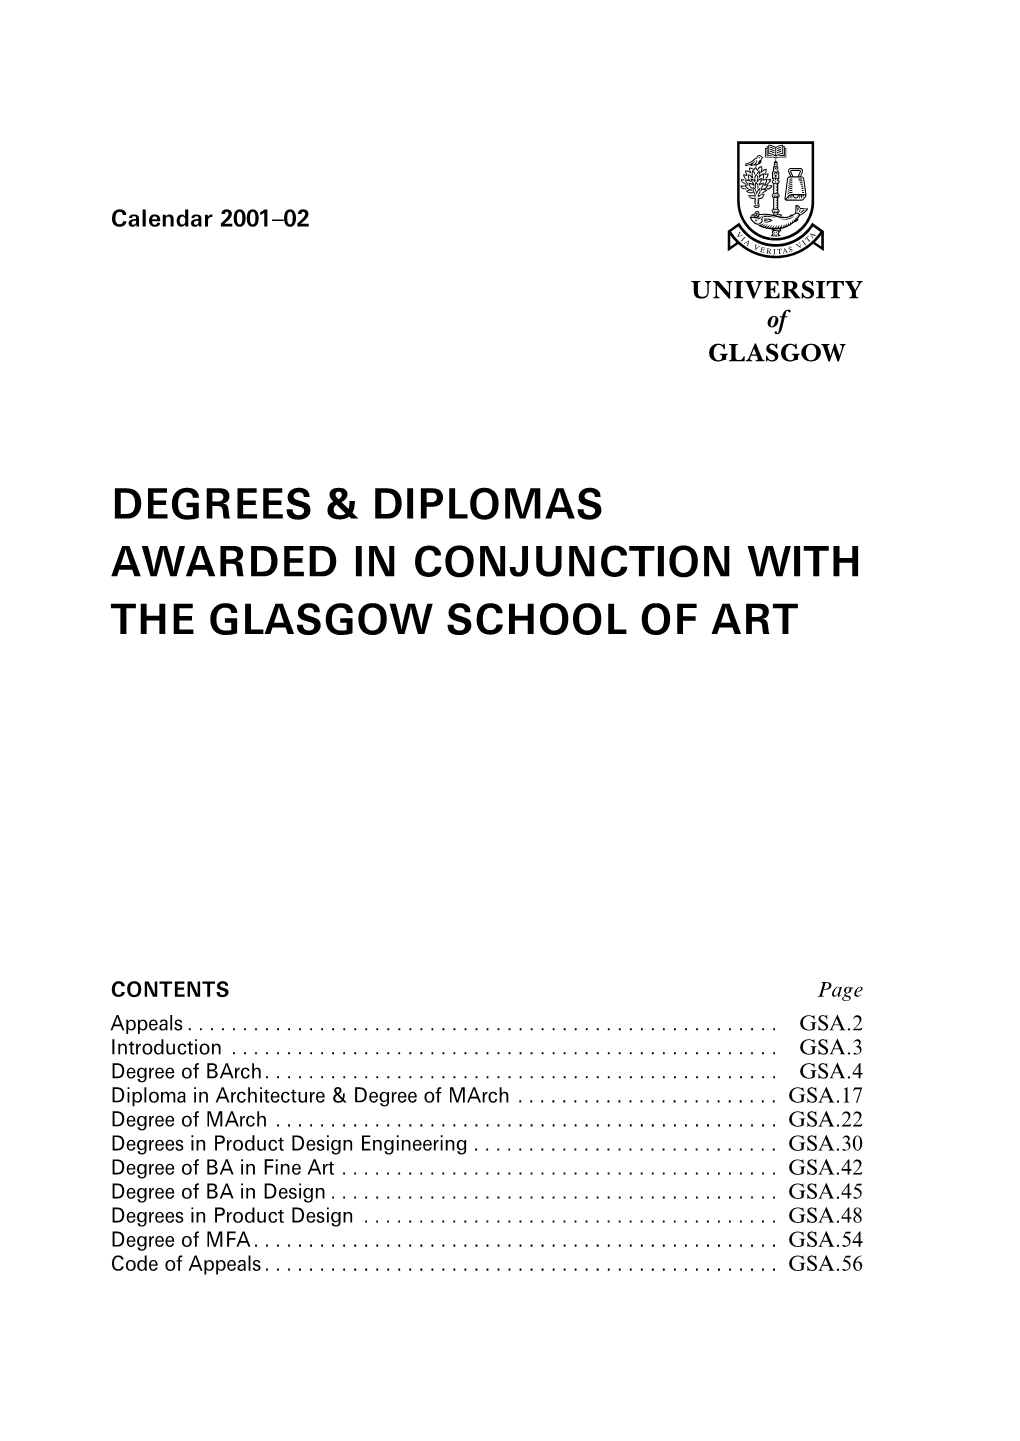 Degrees & Diplomas Awarded in Conjunction with the Glasgow